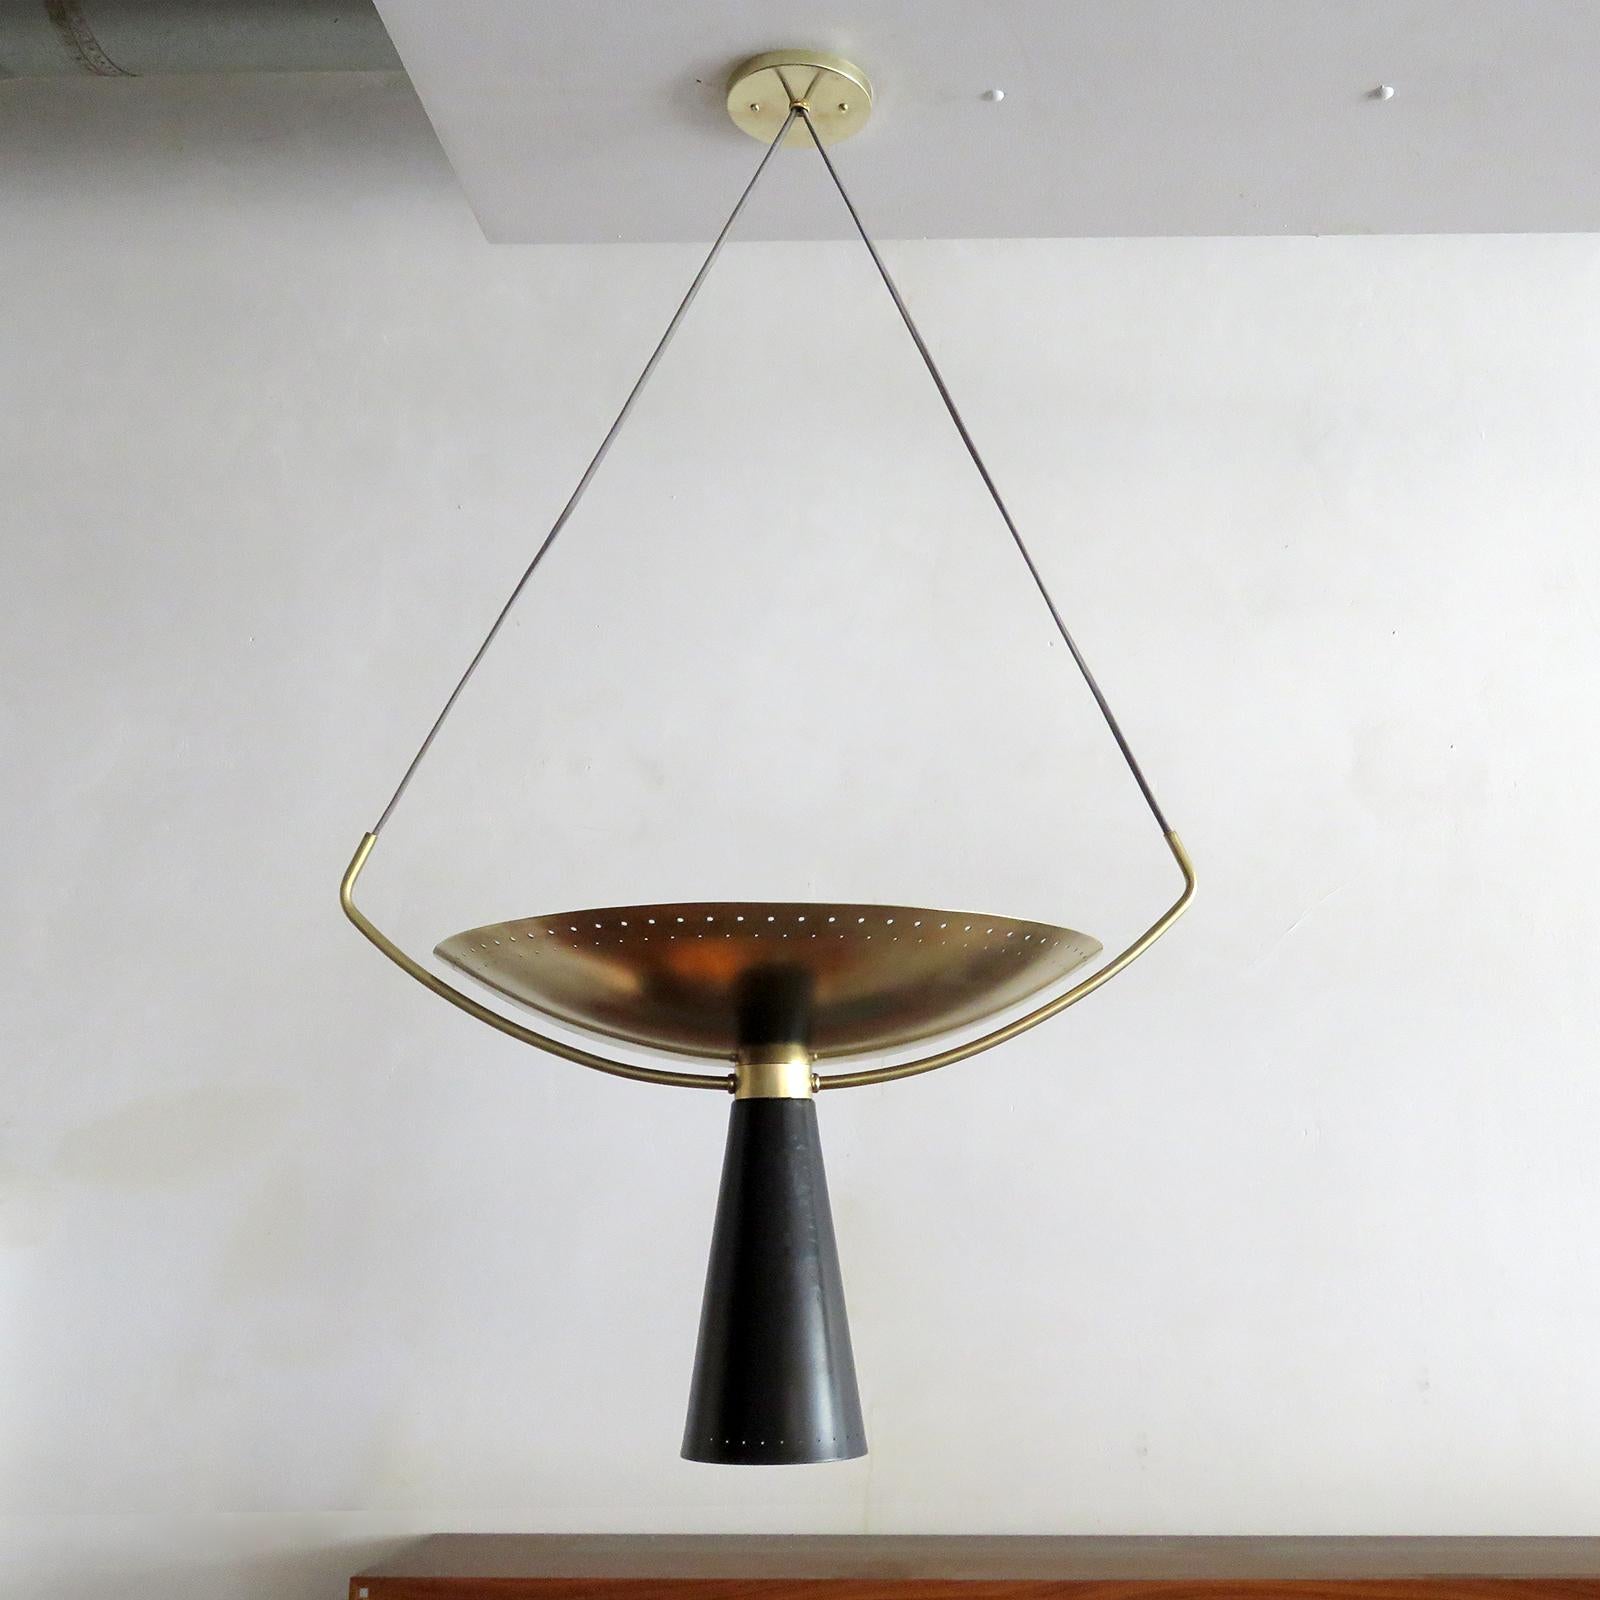 Wonderful two tone pendant light 'Calice-18' designed by Gallery L7, handcrafted and finished in Los Angeles from American brass, suspended with a perforated, aged brass up-light disc and a black enameled down-light cone. Four E26 sockets per